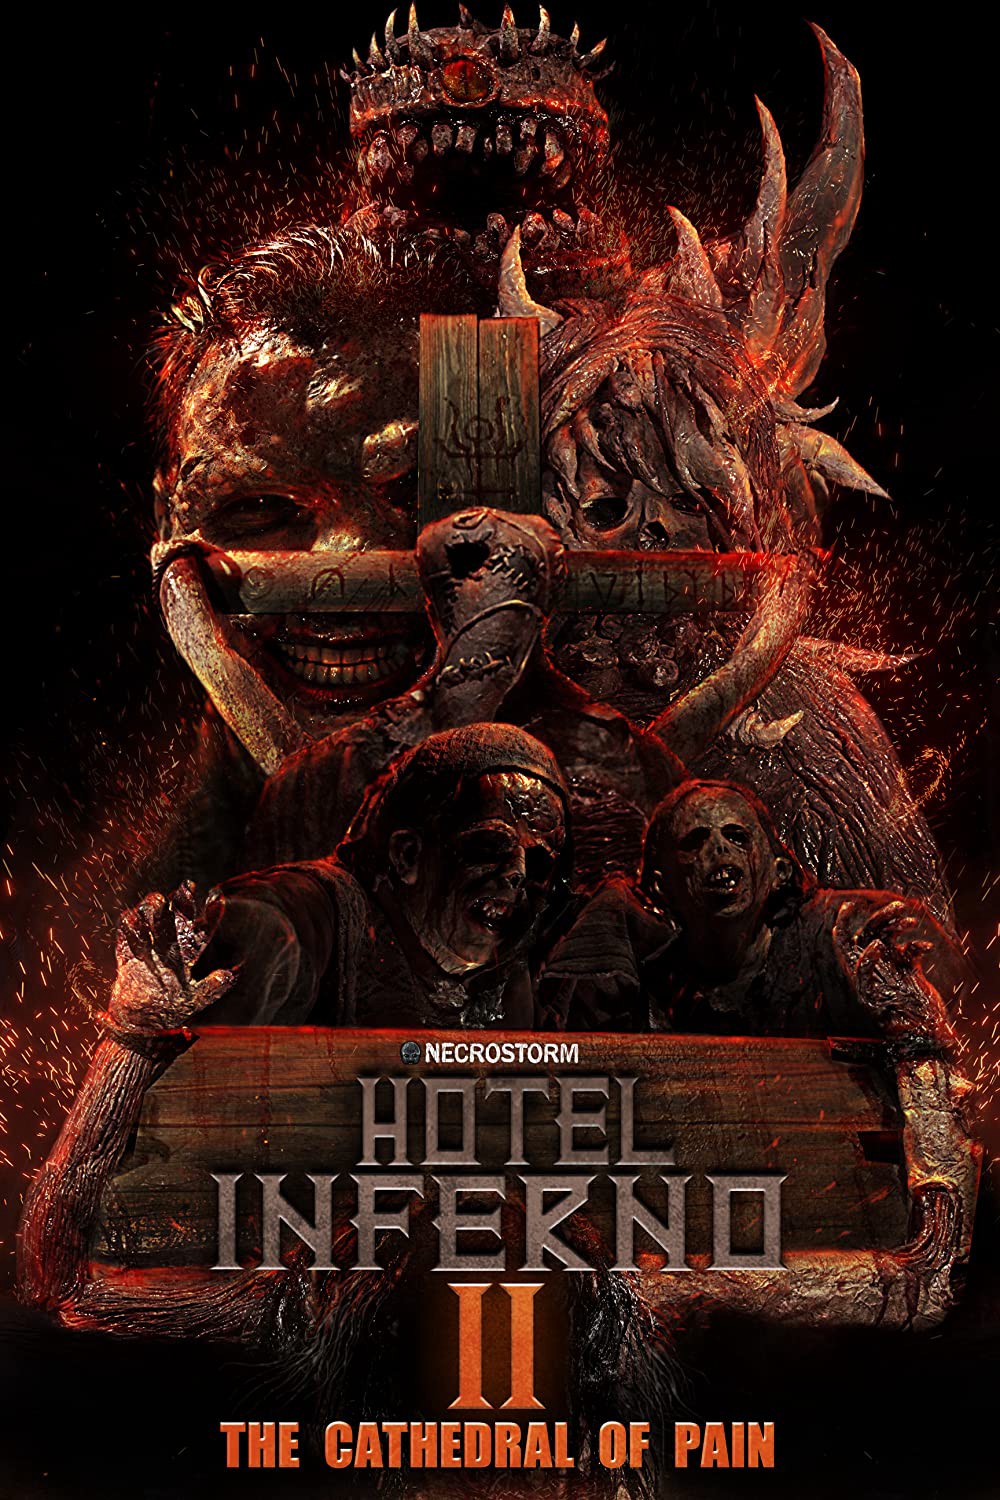 Hotel Inferno 2: The Cathedral of Pain - Hotel Inferno 2: The Cathedral of Pain